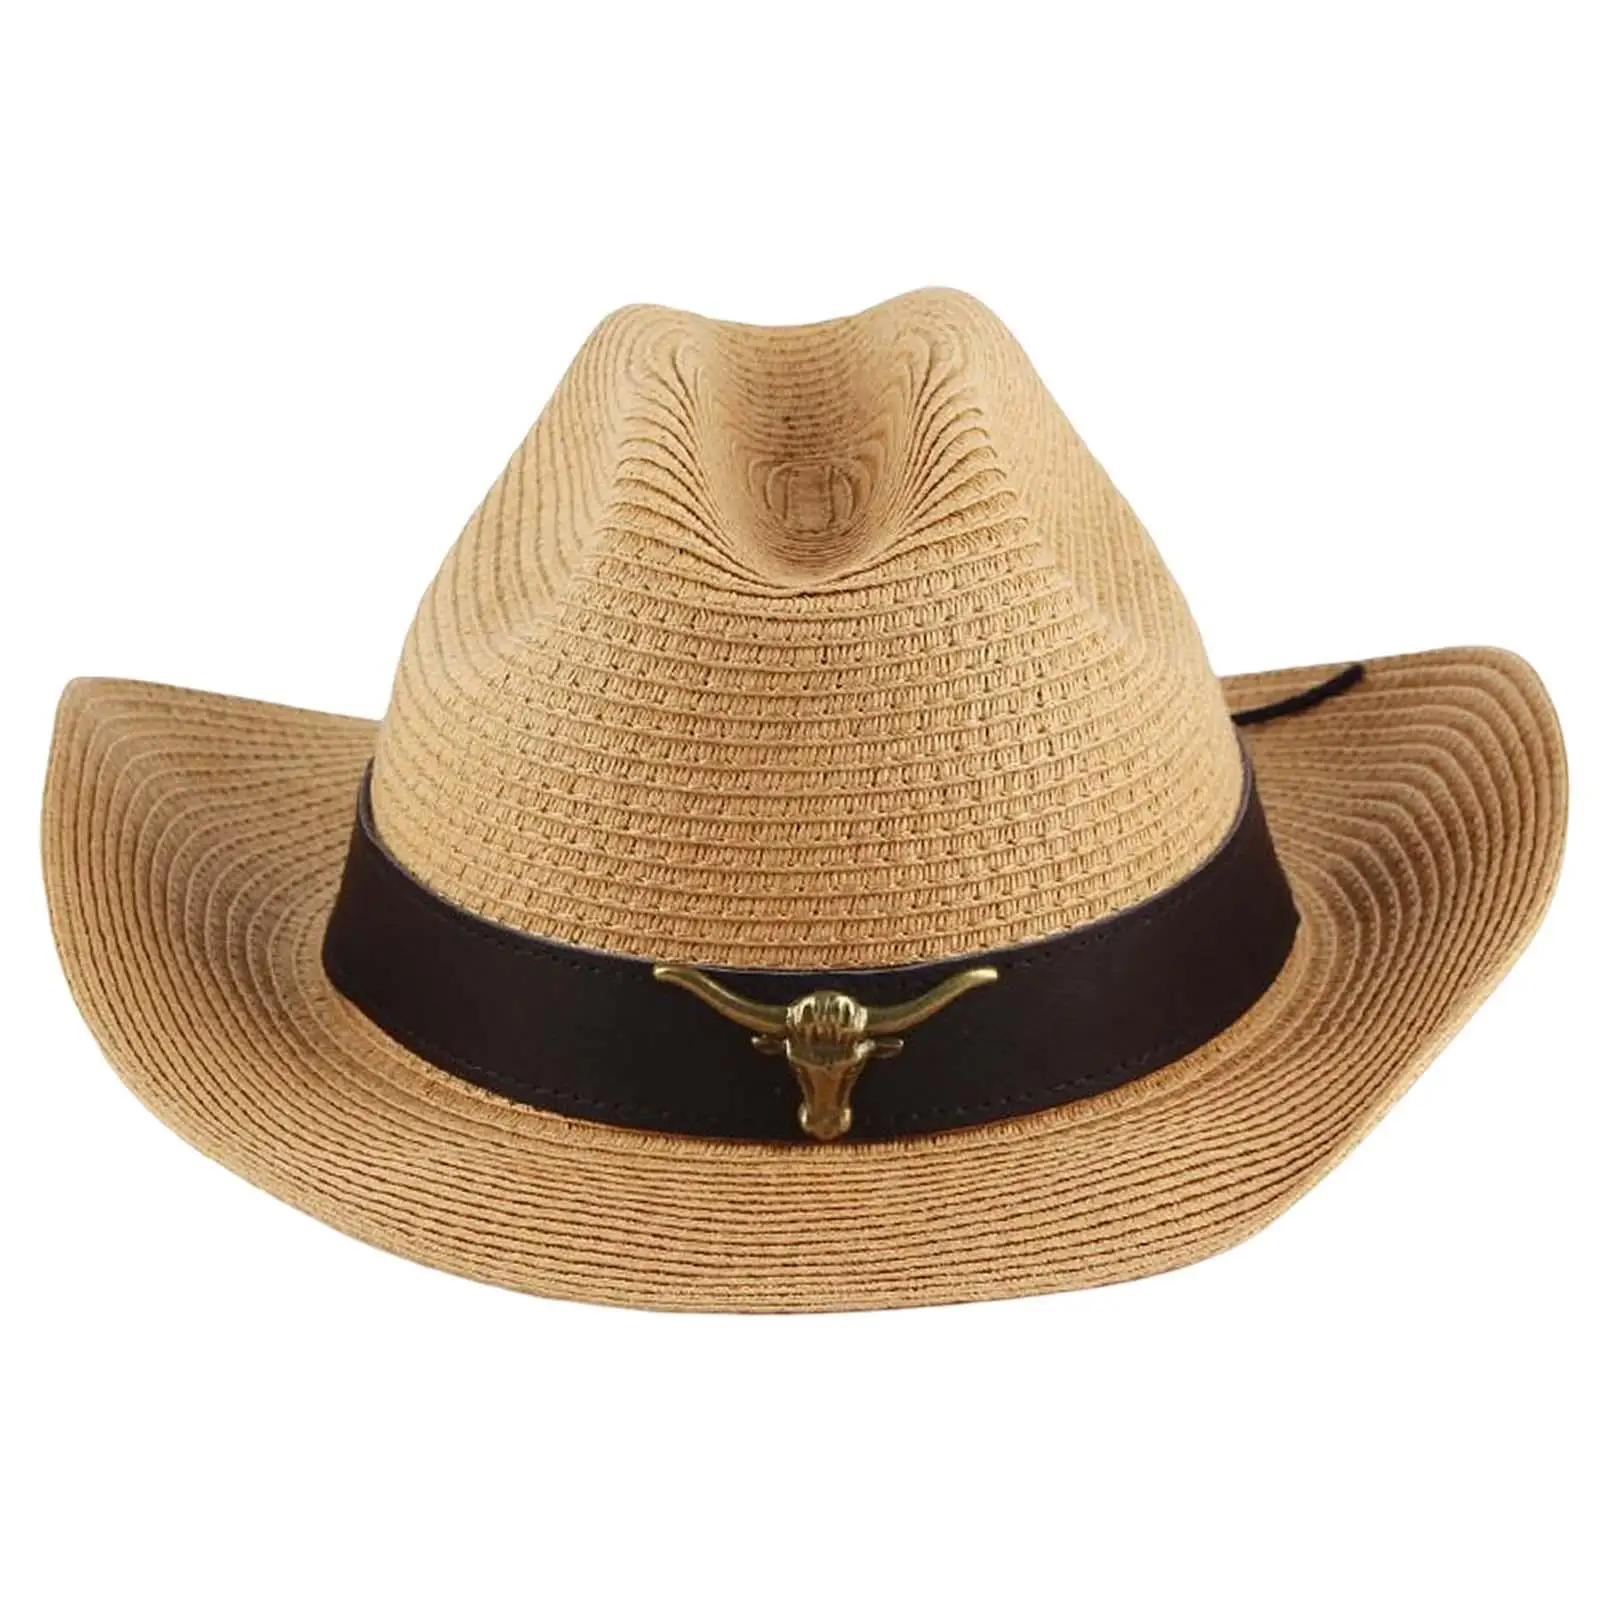 Fashionable Western Cowboy Hat Sun Protection Hat Wide Brim Straw Cow Decorate for Summer Outdoor Leisure Cowgirl Beach Adults